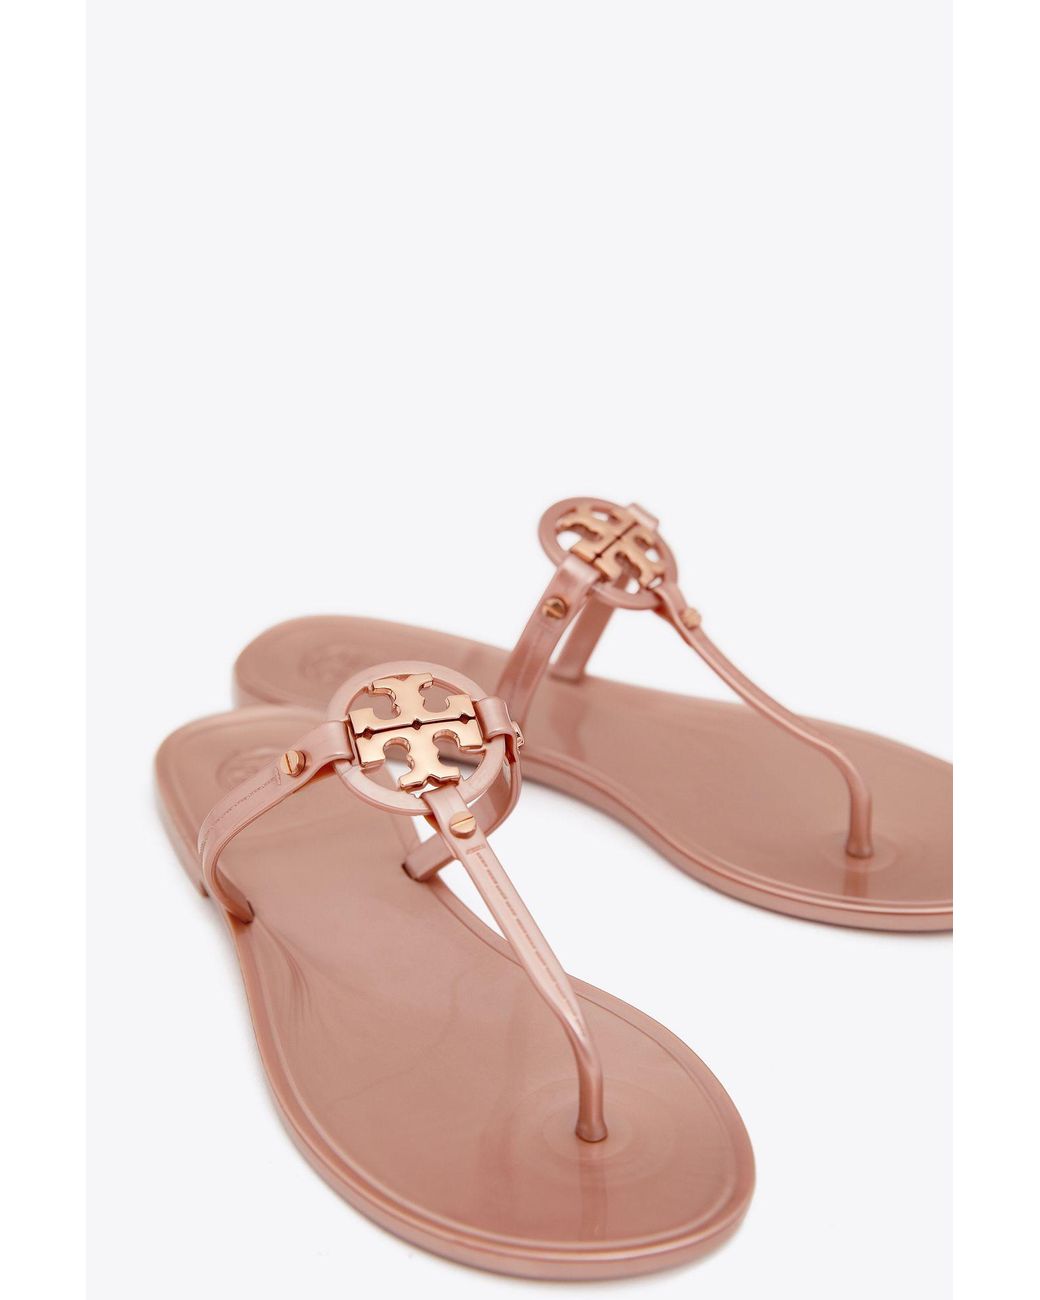 Total 81+ imagen tory burch rose gold jelly sandals - Abzlocal.mx